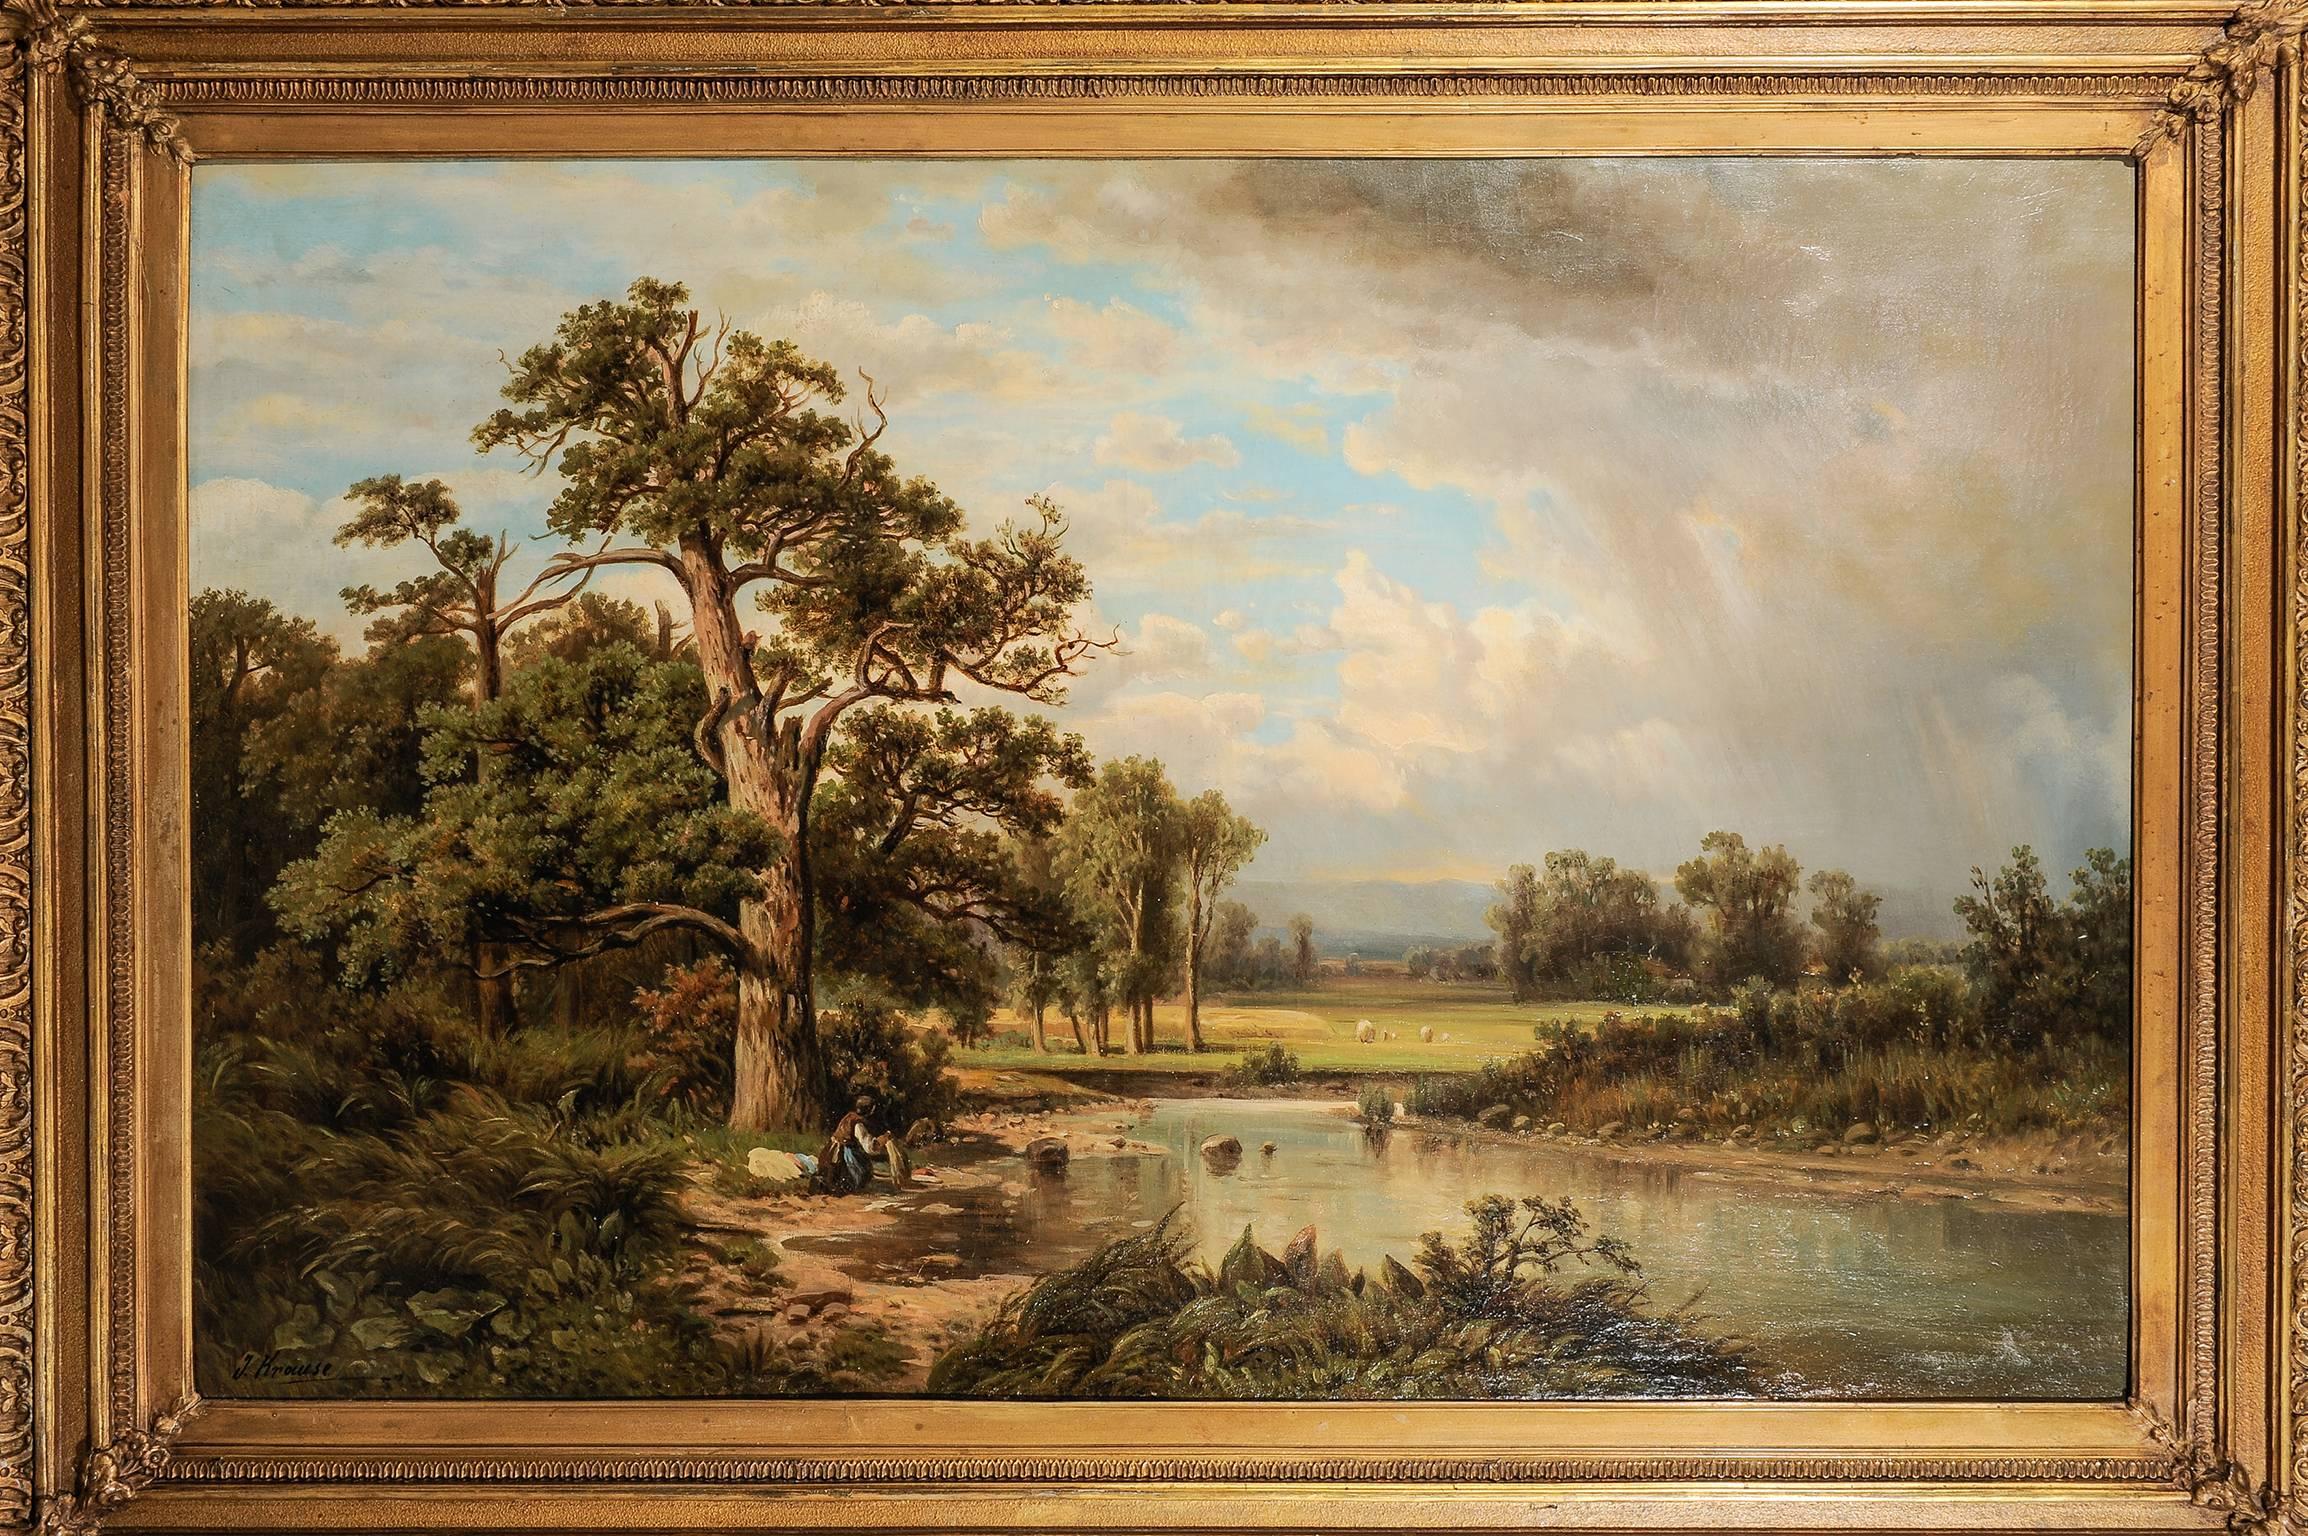 Antique large German painting with an Italian landscape - Many European painters came to Italy to paint its beautiful natural landscape, full of sun.
This painter was Franz Krause, born in Germany 31th March 1823 , died in Leitmeritz on 18th March